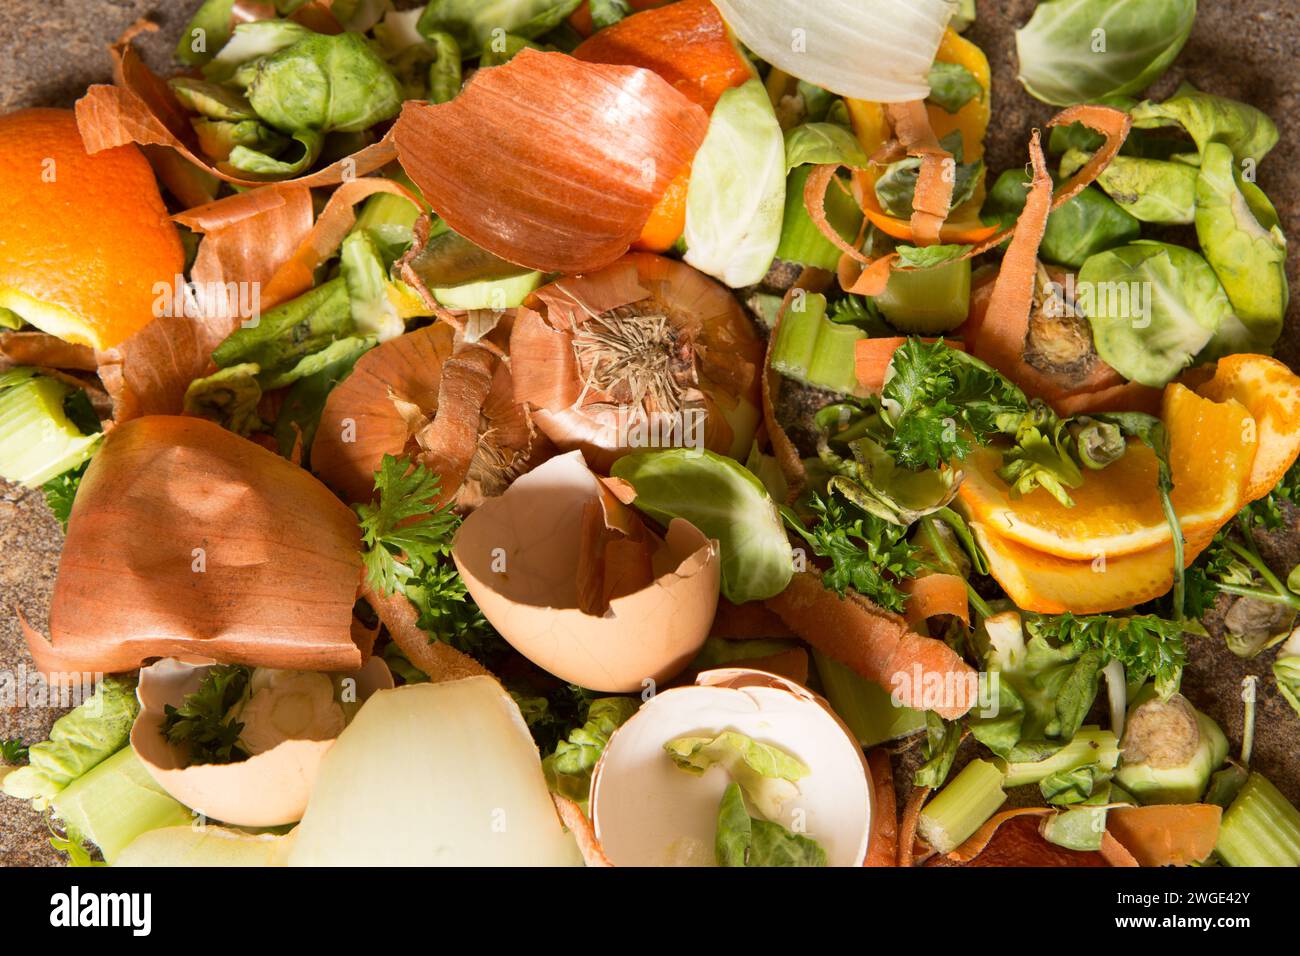 California food waste to be recycled for compost Stock Photo